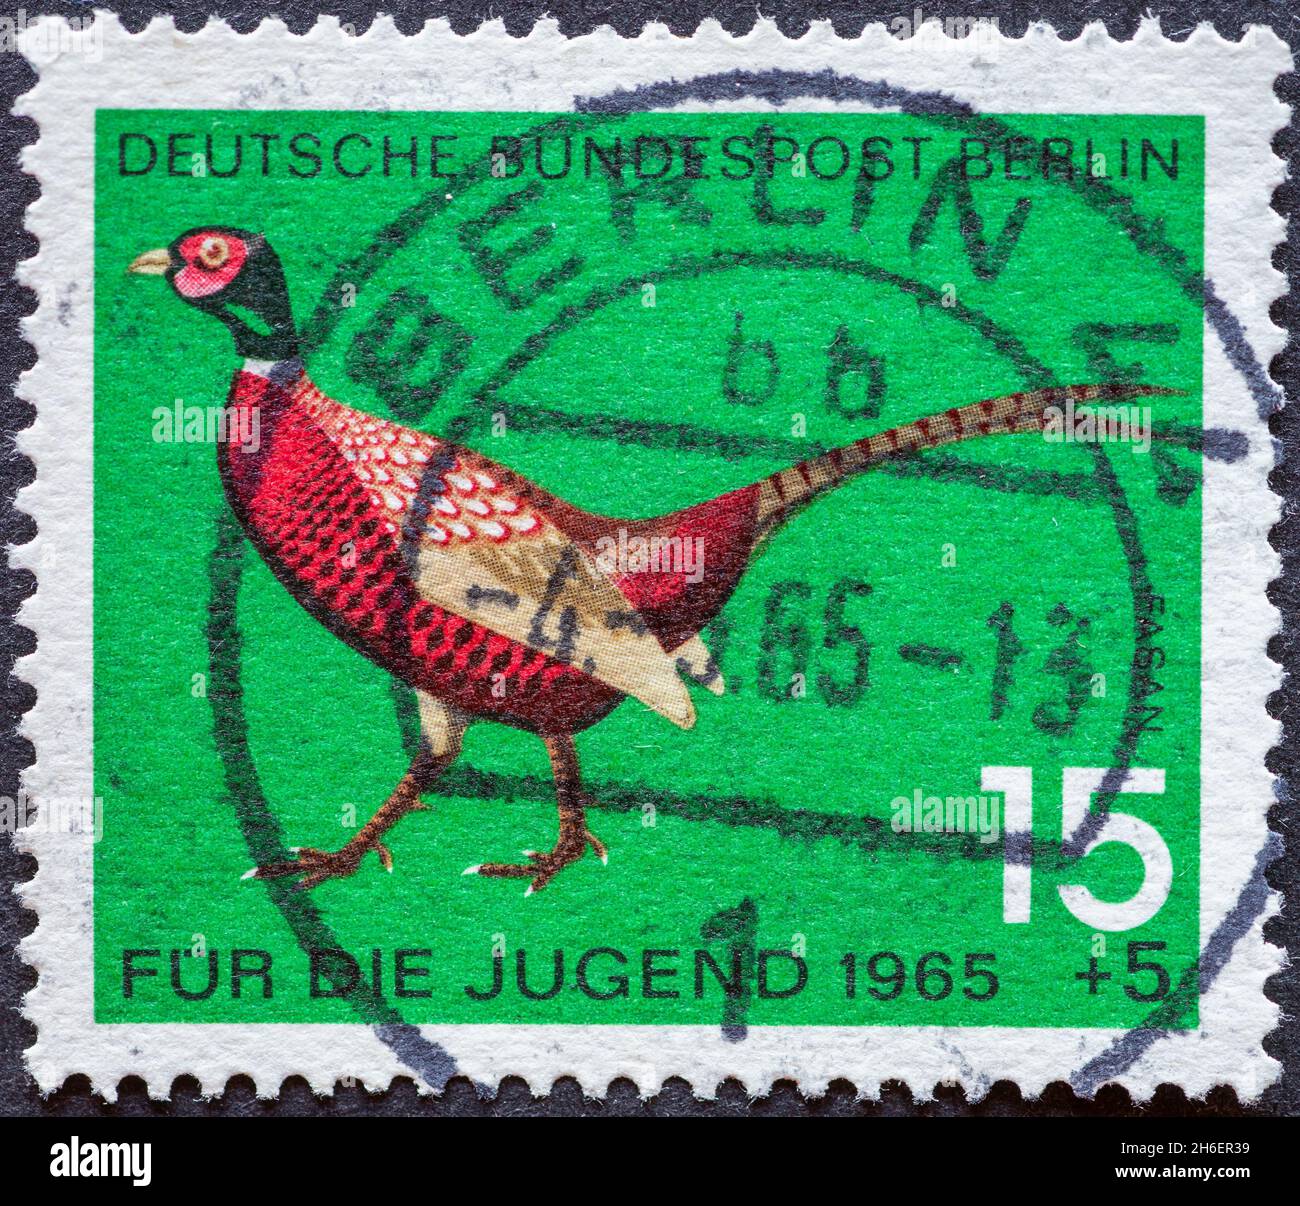 GERMANY, Berlin - CIRCA 1965: a postage stamp from Germany, Berlin showing special wildlife birds: cock pheasant charity postal stamp for youngsters Stock Photo